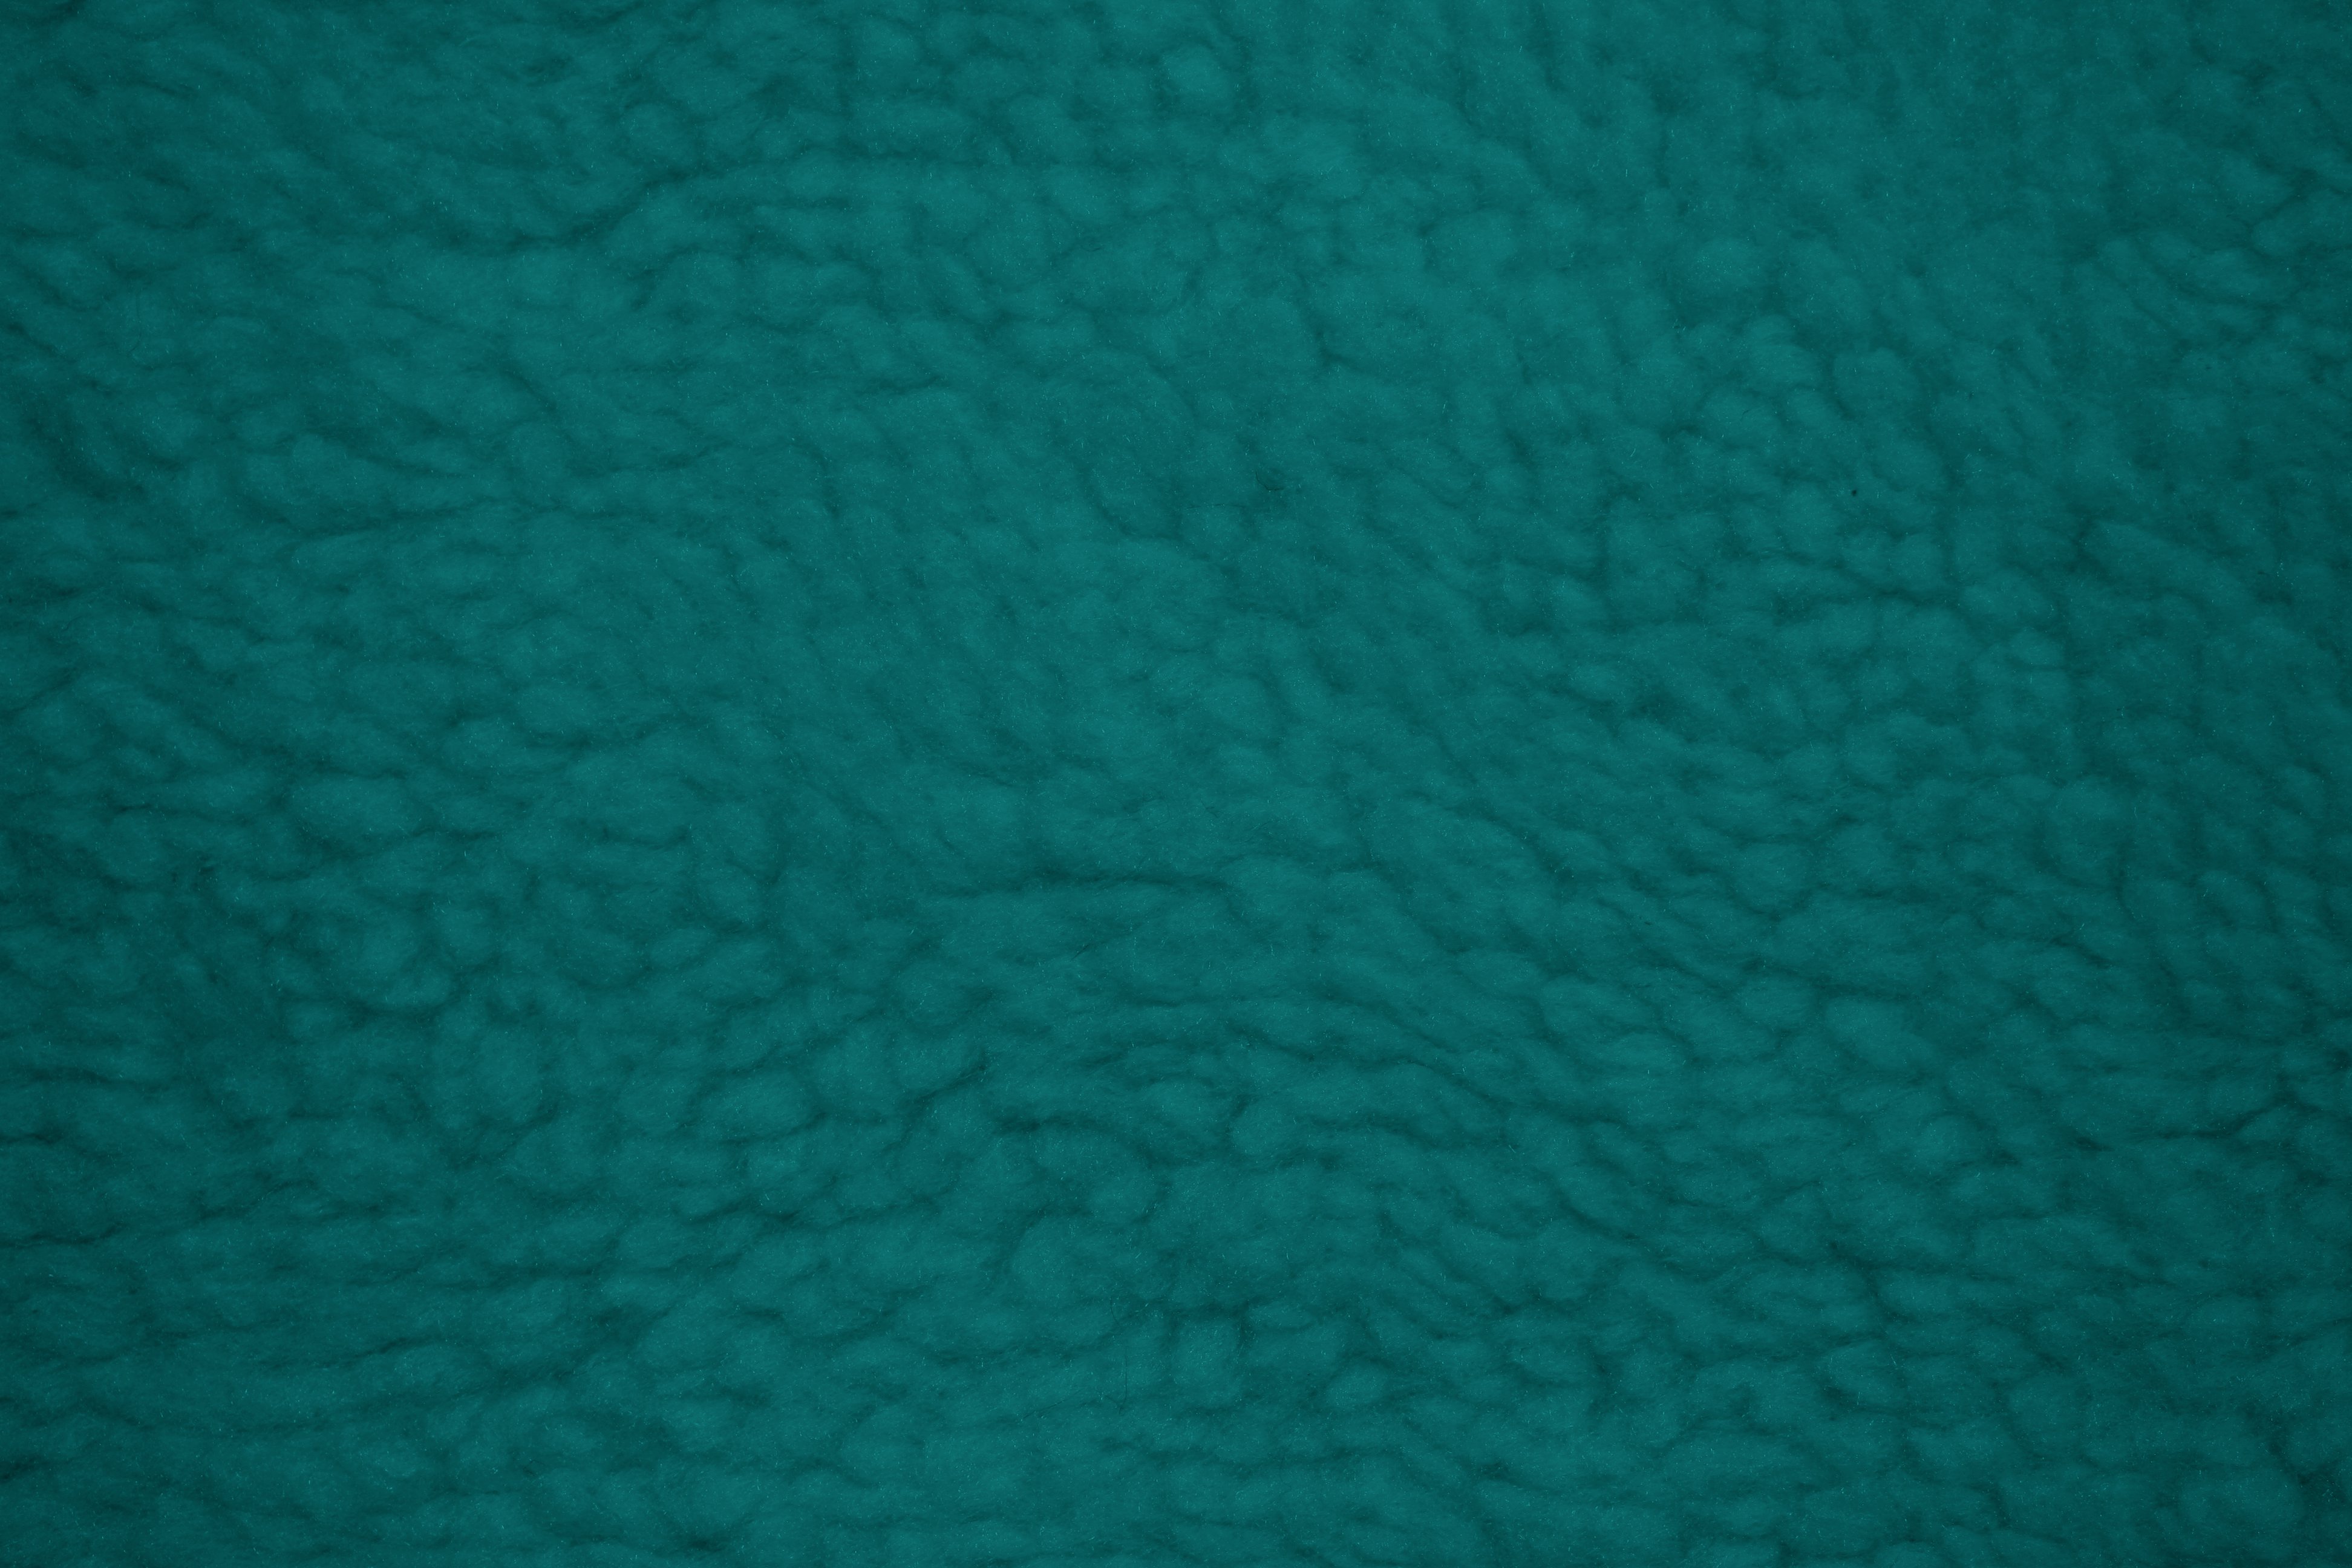 Teal Fleece Faux Sherpa Wool Fabric Texture Picture Photograph